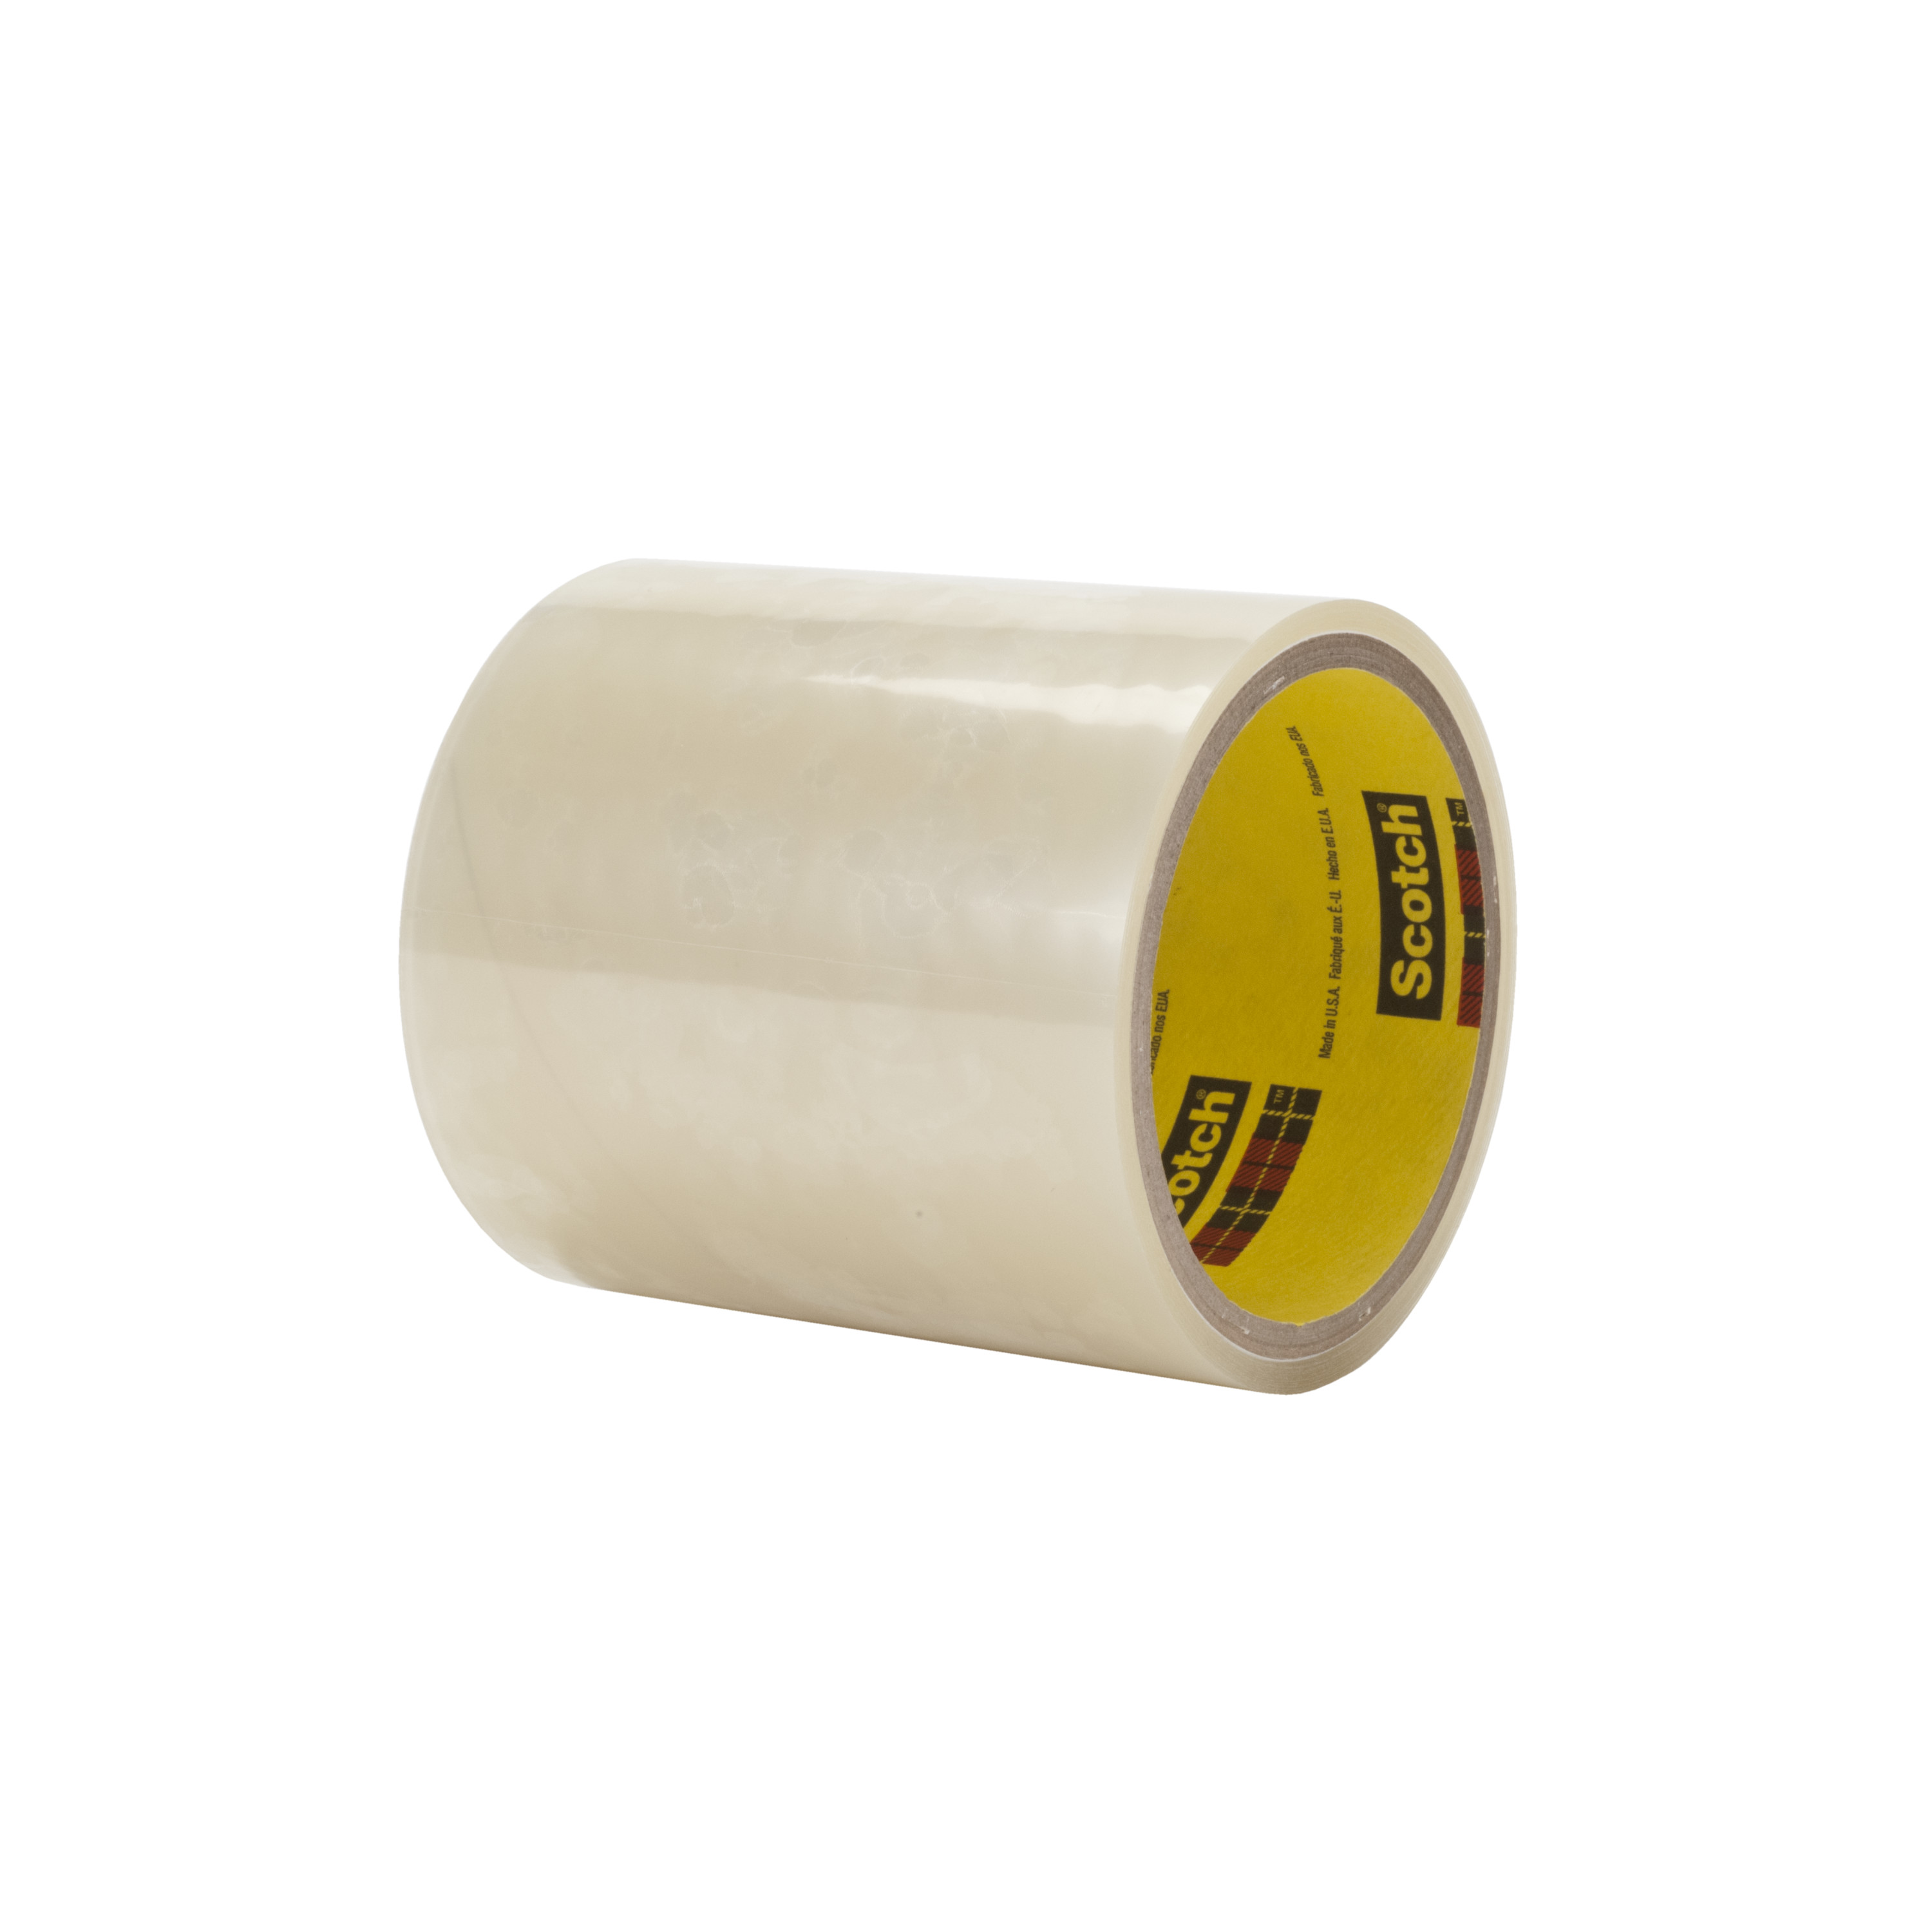 3M™ Adhesive Transfer Tape 467MP, Clear, 11 3/4 in x 180 yd, 2 mil, 1
roll per case